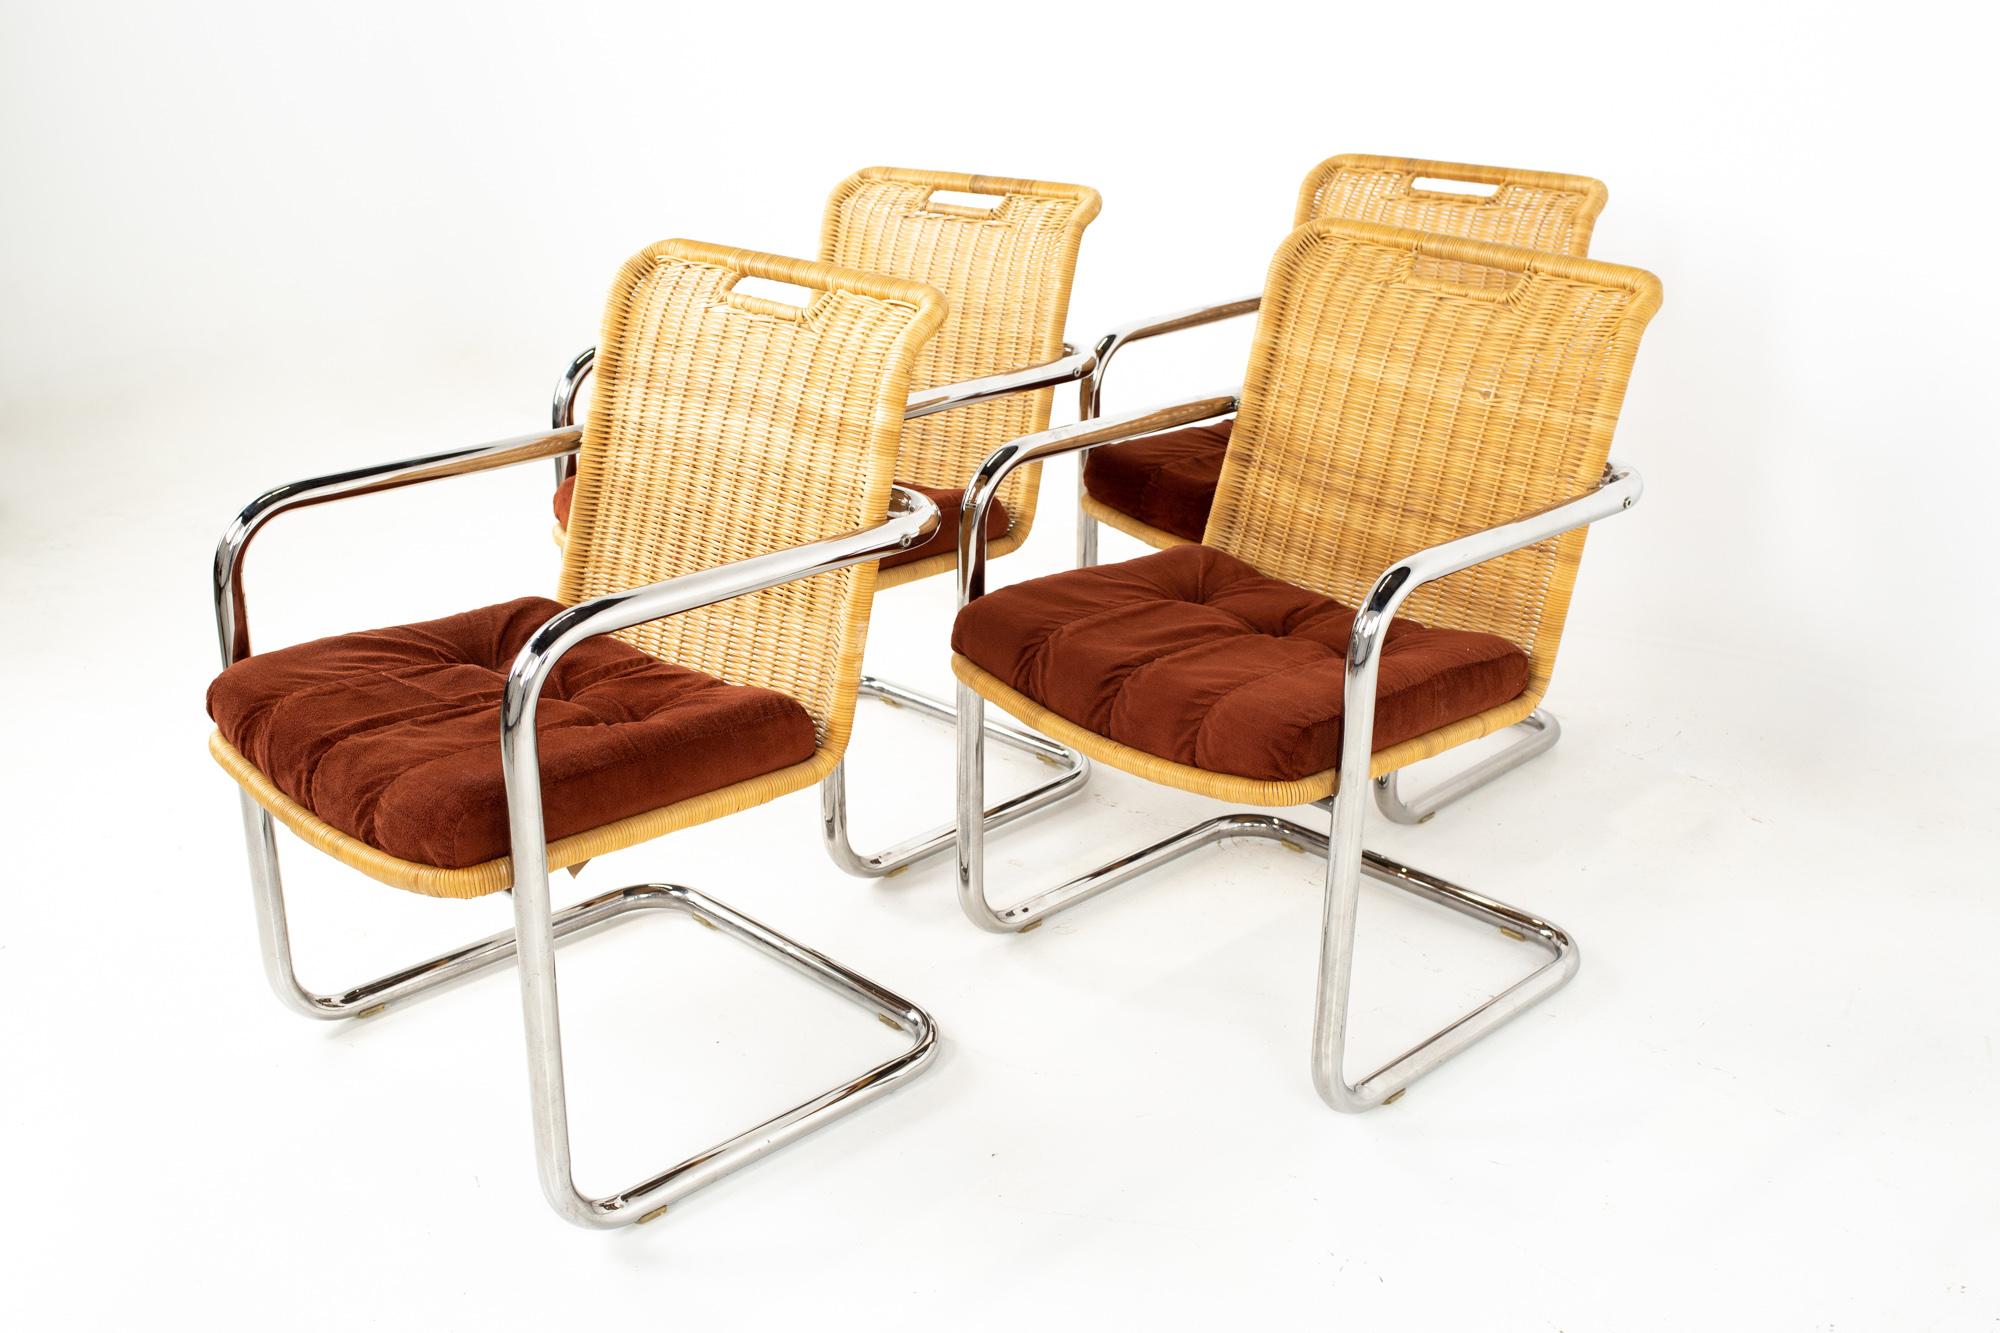 Harvey Probber style mid century cane and chrome dining chairs - set of 4
Each chair measures: 22.5 wide x 23.5 deep x 33.25 high. with a seat height of 18.5 inches

All pieces of furniture can be had in what we call restored vintage condition.